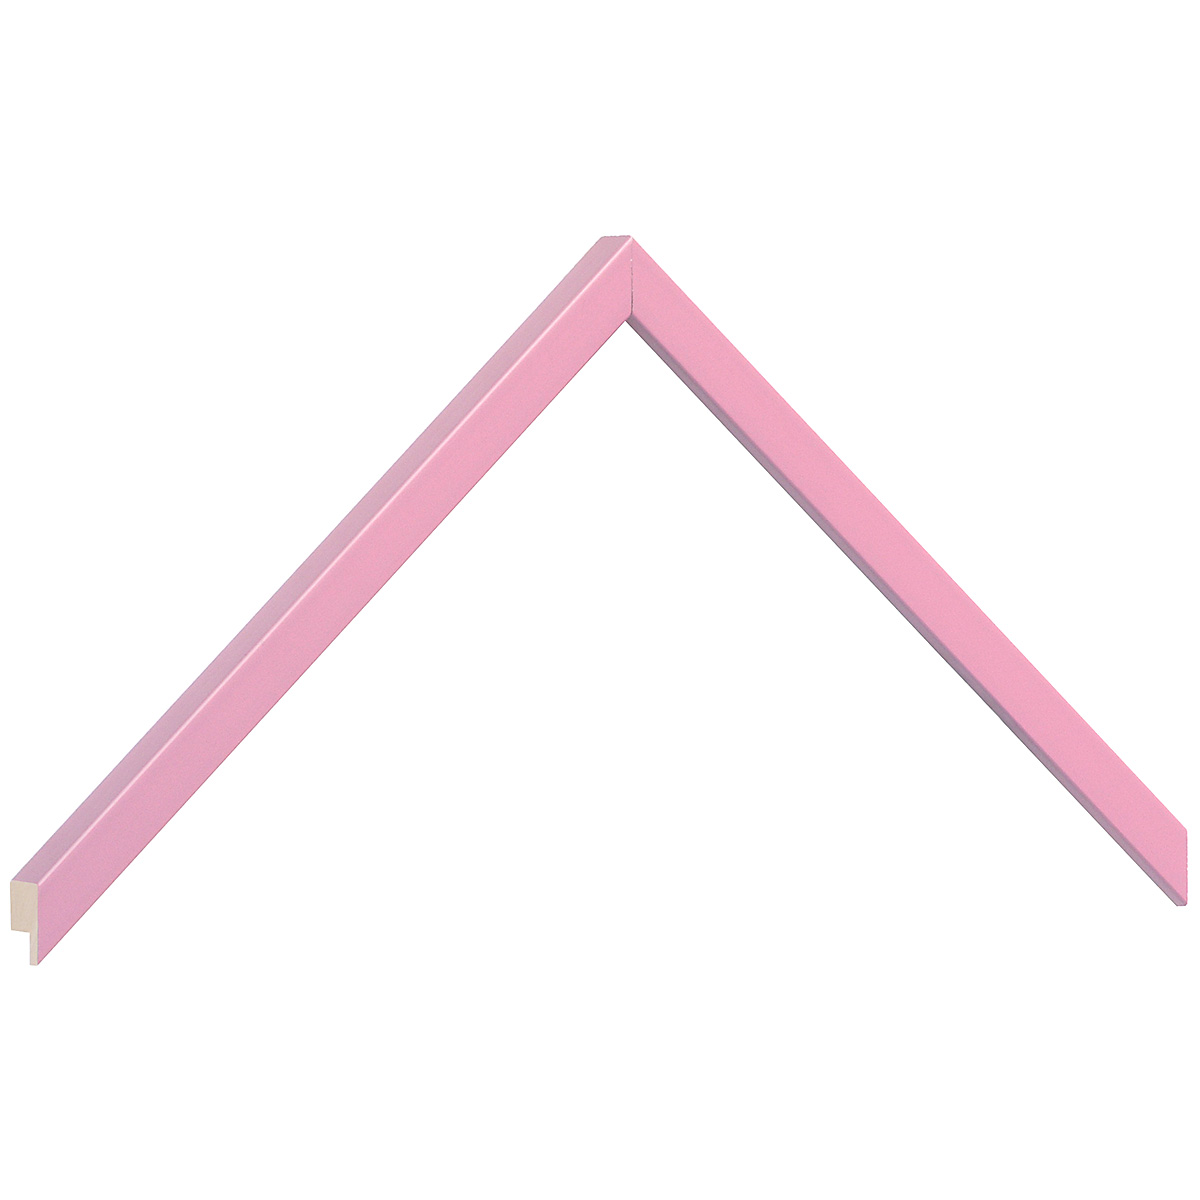 Moulding ramin width 10mm height 14 - pink - Sample